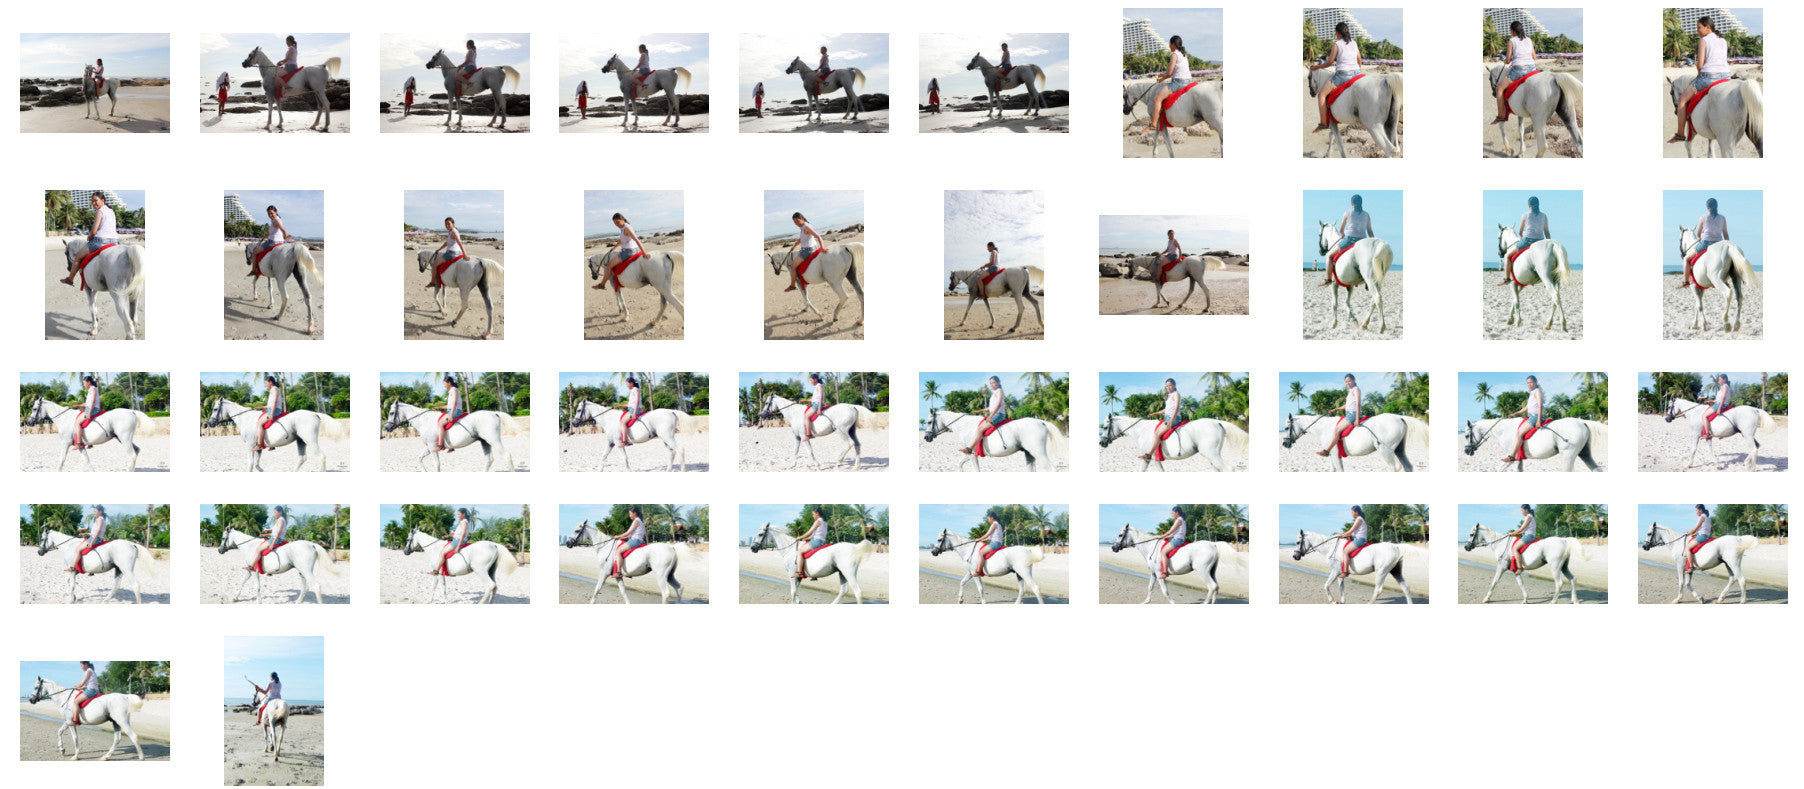 Nam in Hotpants Riding with Bareback Pad on White Arabian Horse, Part 2 - Riding.Vision